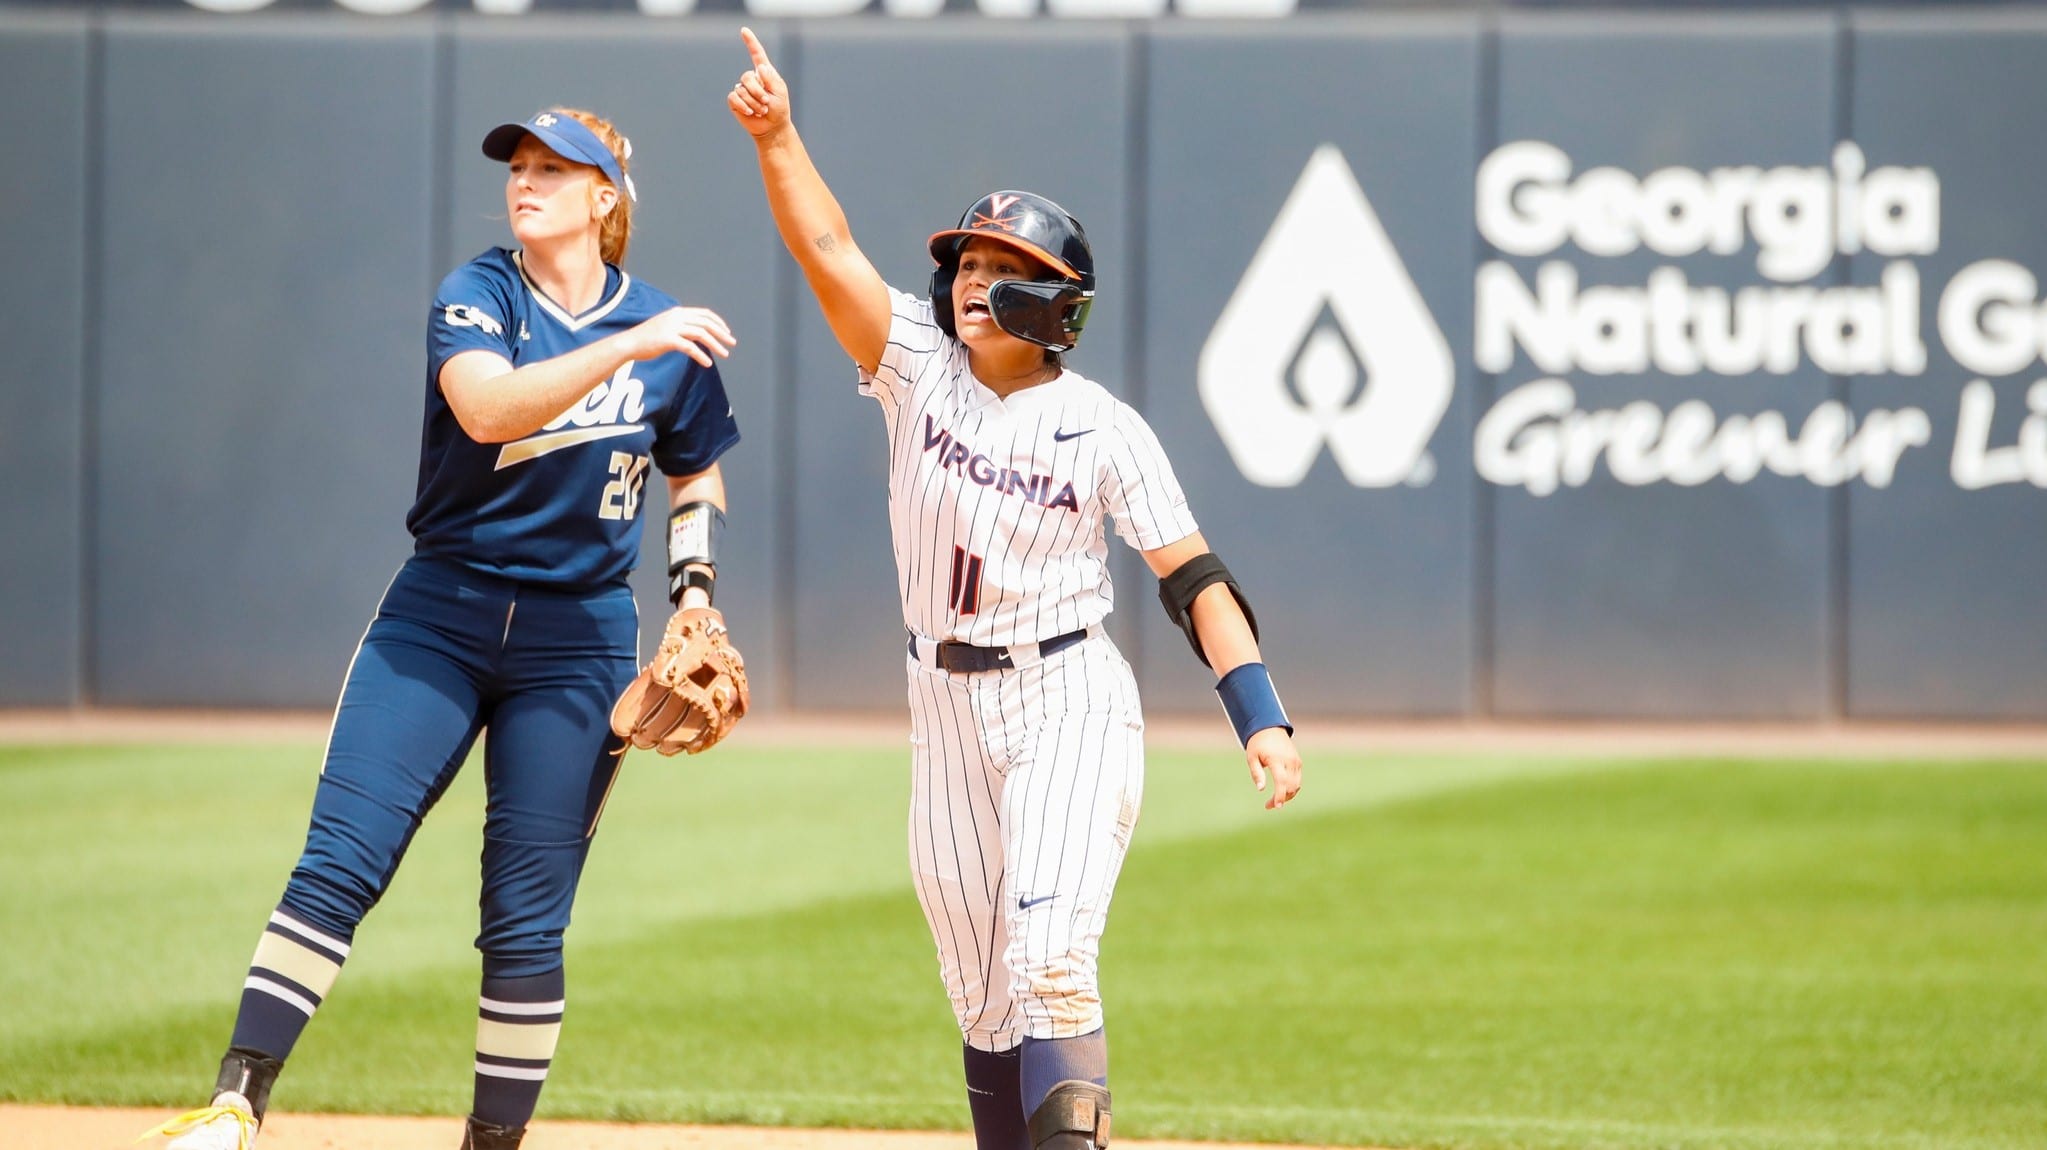 Abby Weaver celebrates after hitting a double during the Virginia softball game at Georgia Tech.